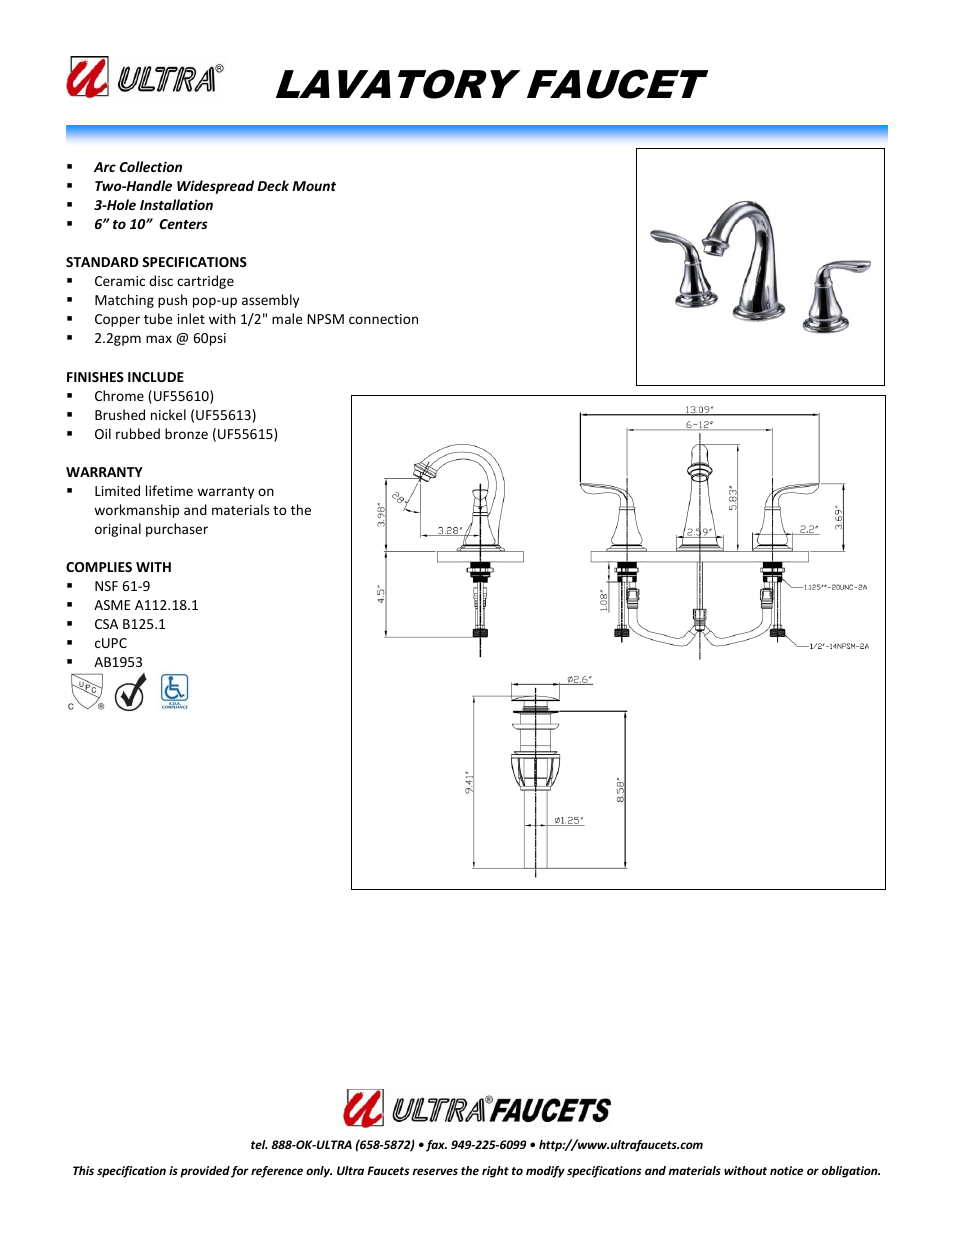 "ARC COLLECTIONTWO-HANDLE WIDESPREAD LAVATORY FAUCET"